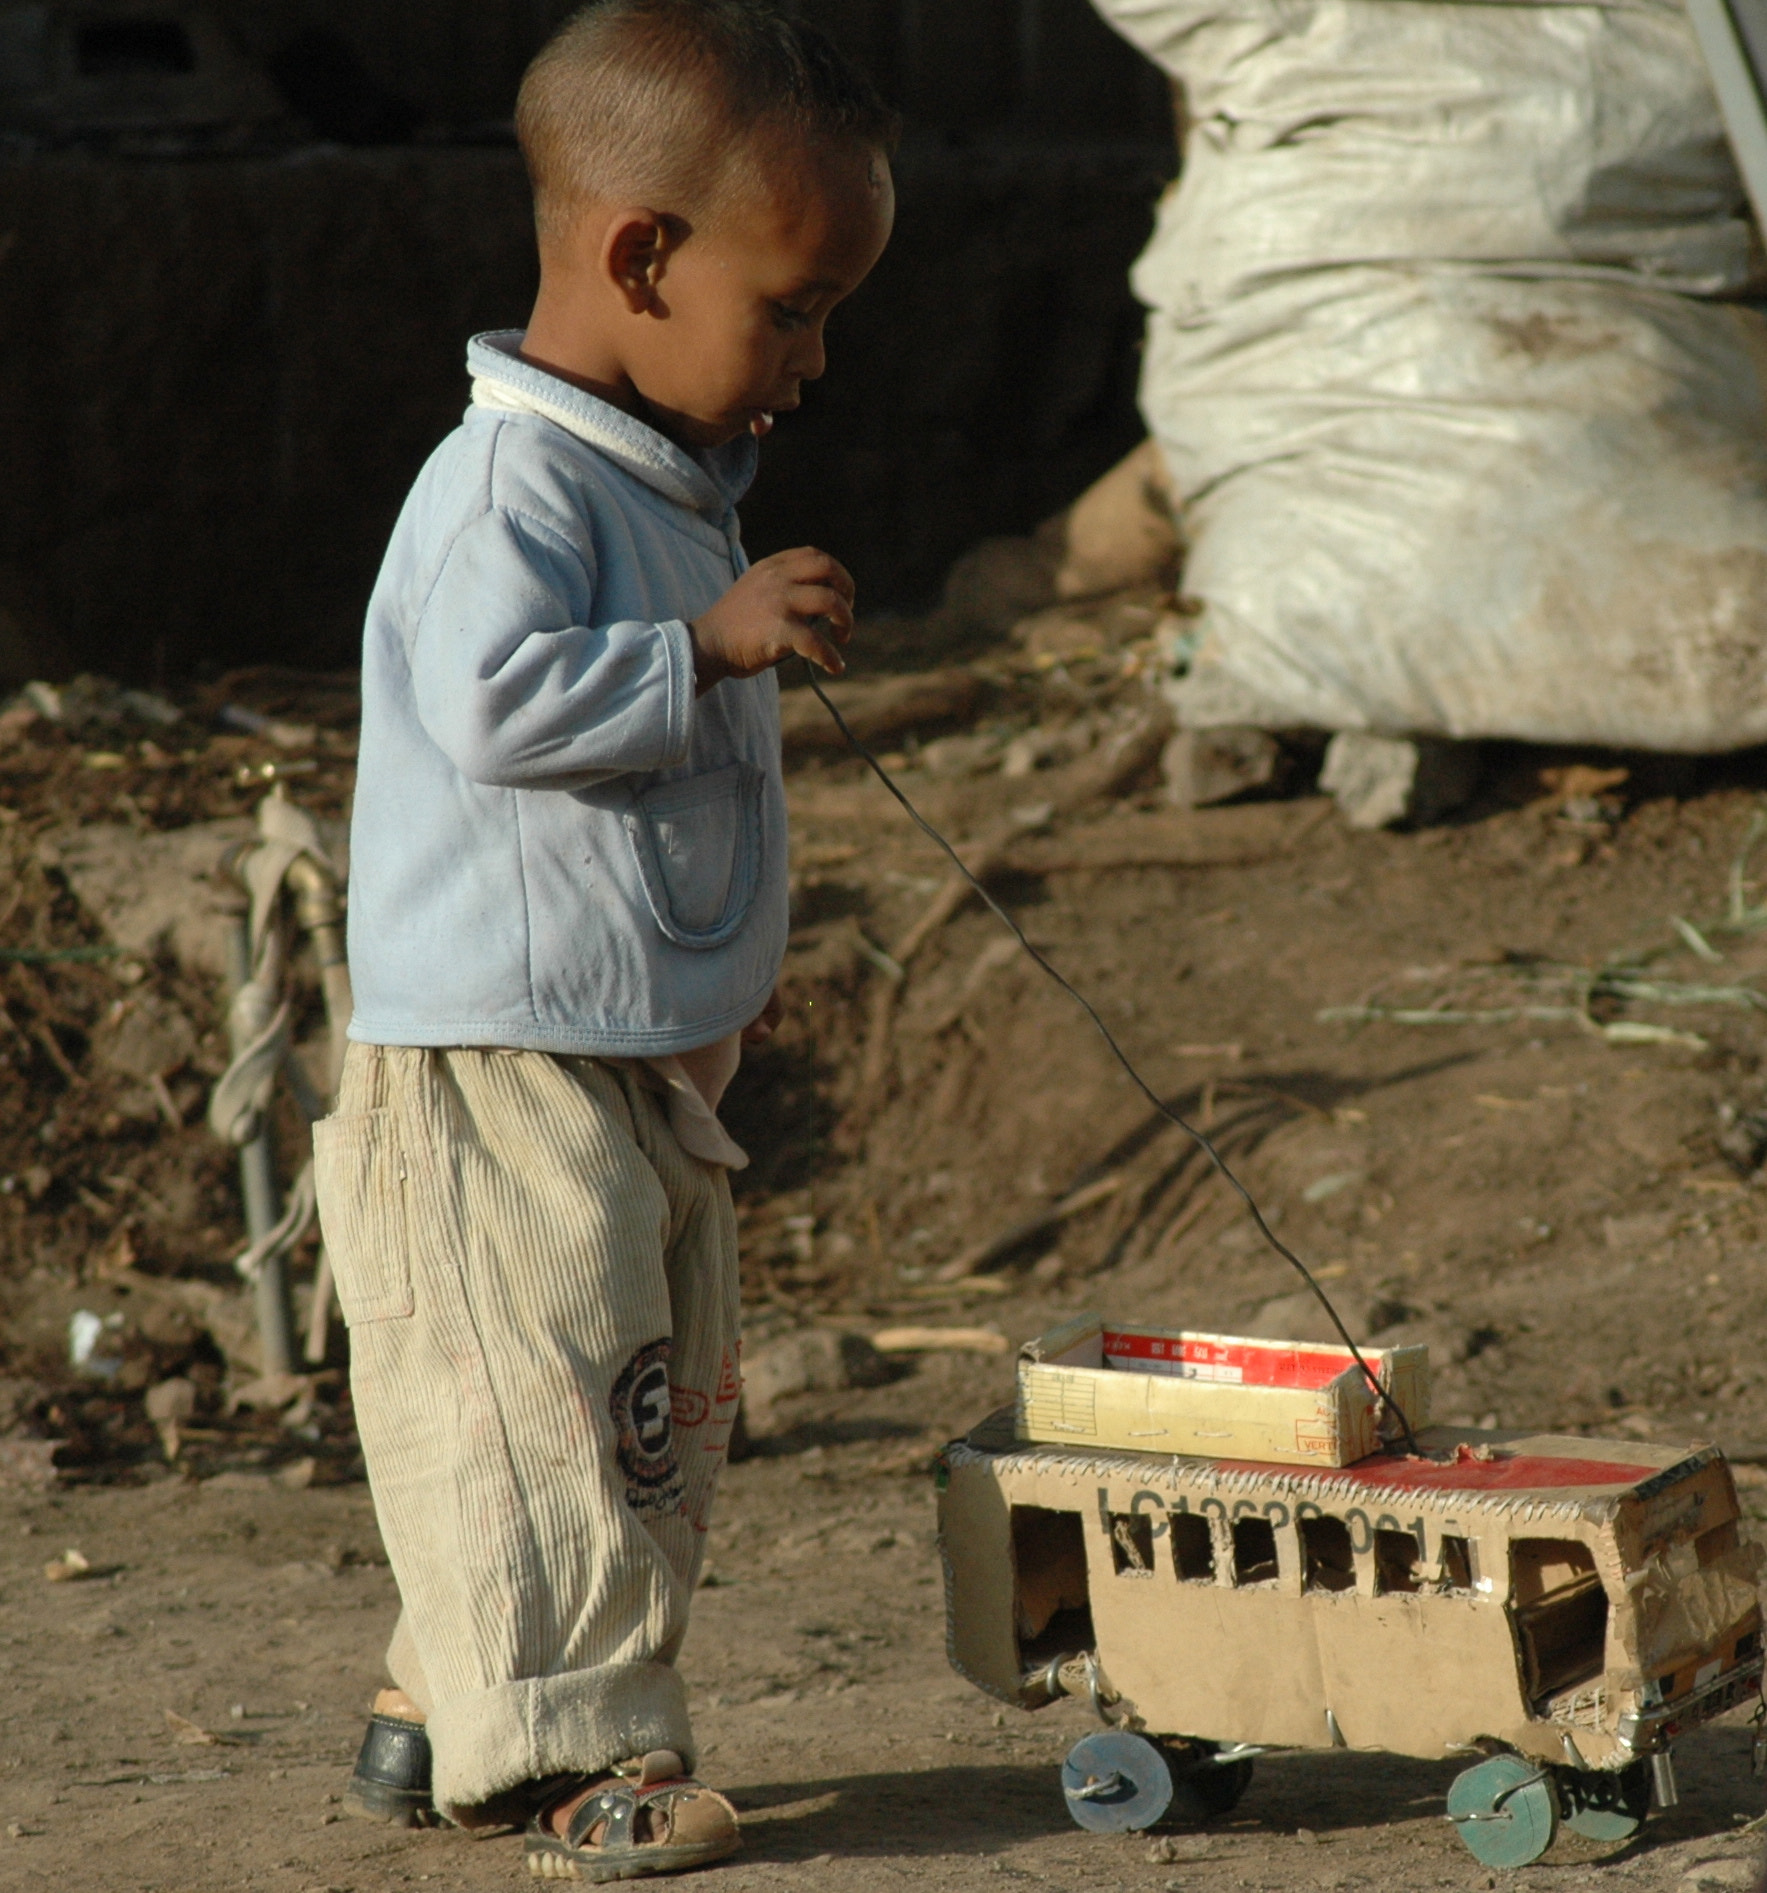 Tamron AF 70-300mm F4-5.6 Di LD Macro sample photo. Ethiopia, village boy, little boy, baggy pants, playing, toy train, dirt road, child, blue shirt,... photography